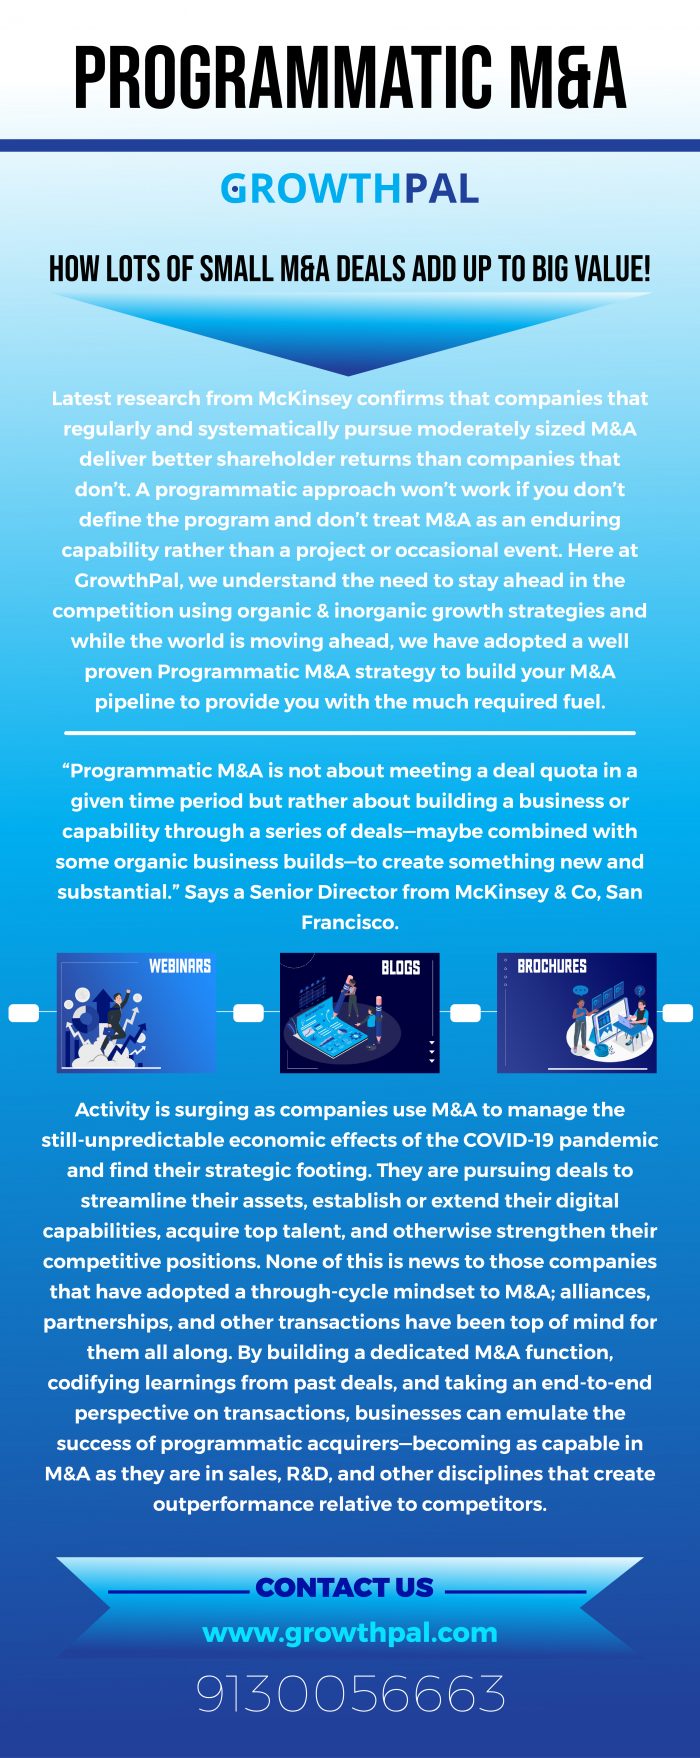 Adopt Programmatic m&a and build your M&A pipeline with GrowthPal